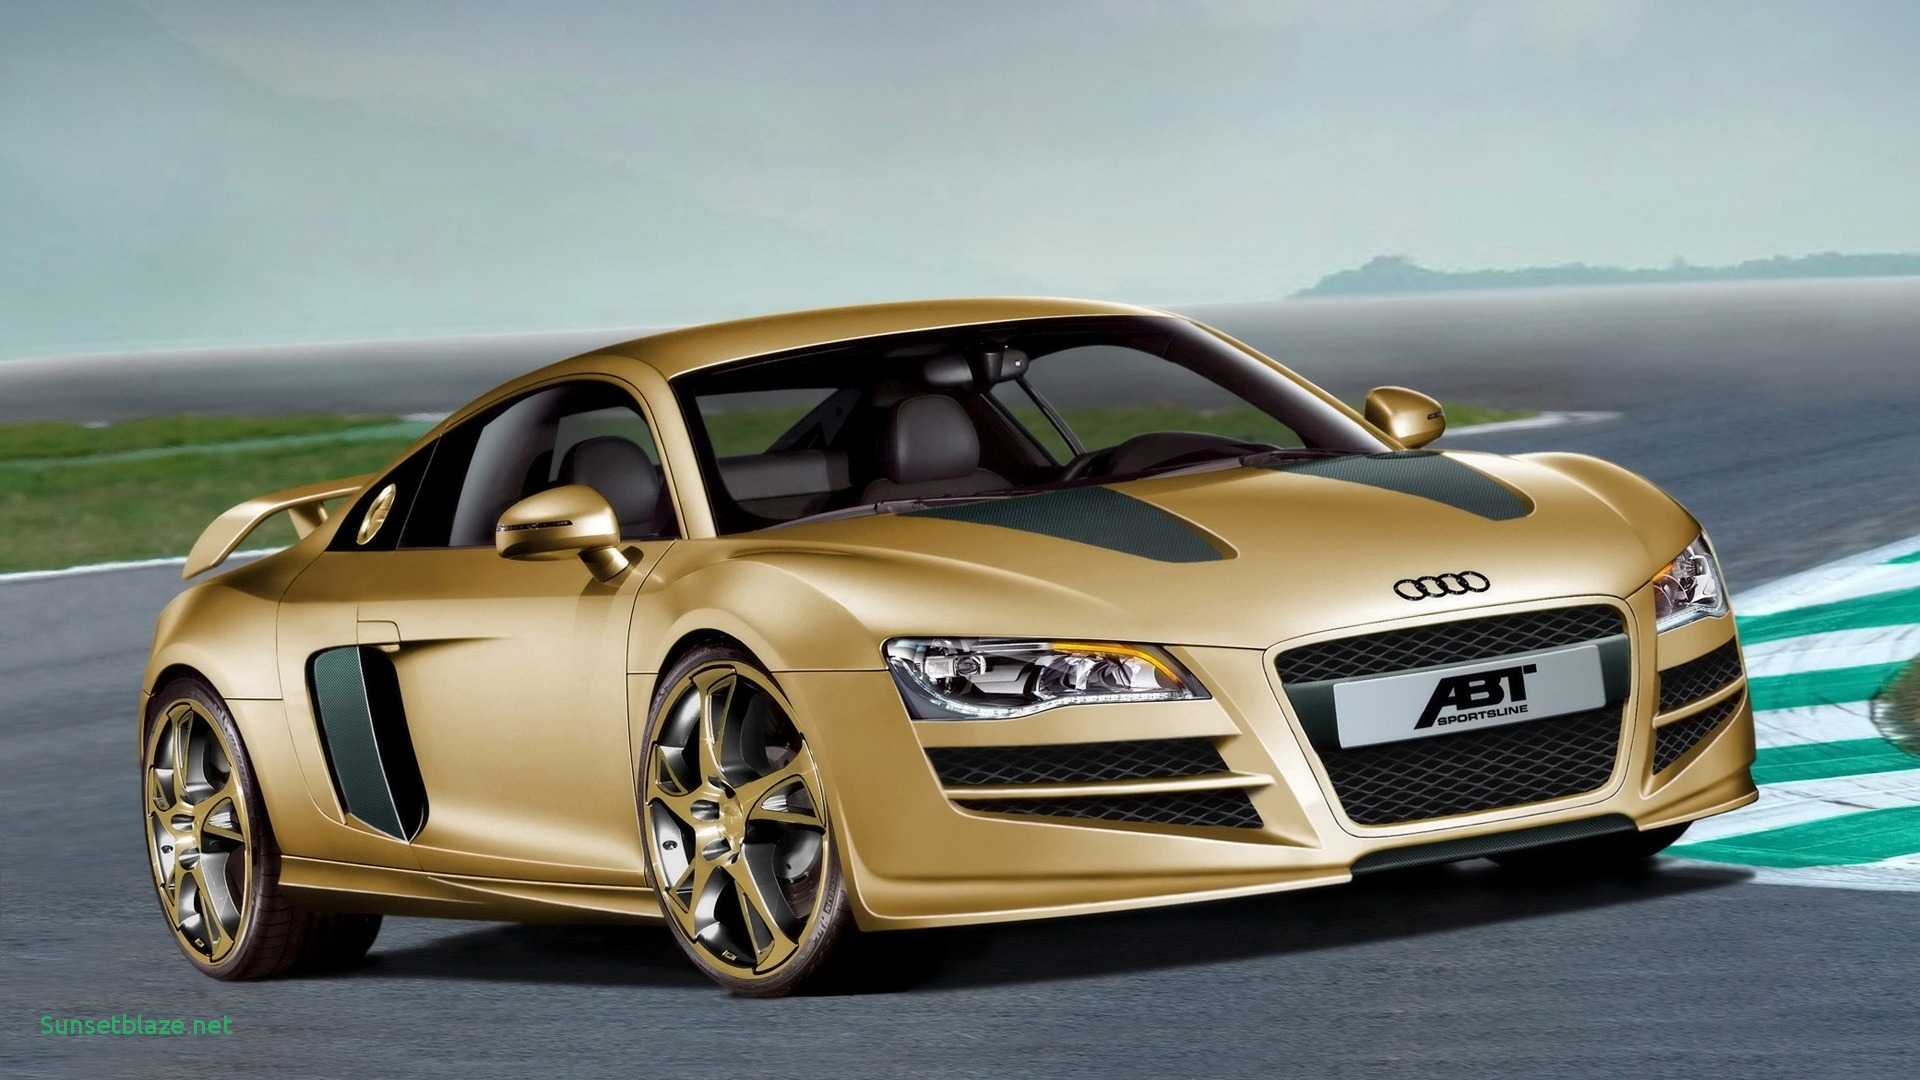 Awesome Audi Car Wallpaper HD Free Wallpaper R for Mobile X Unique